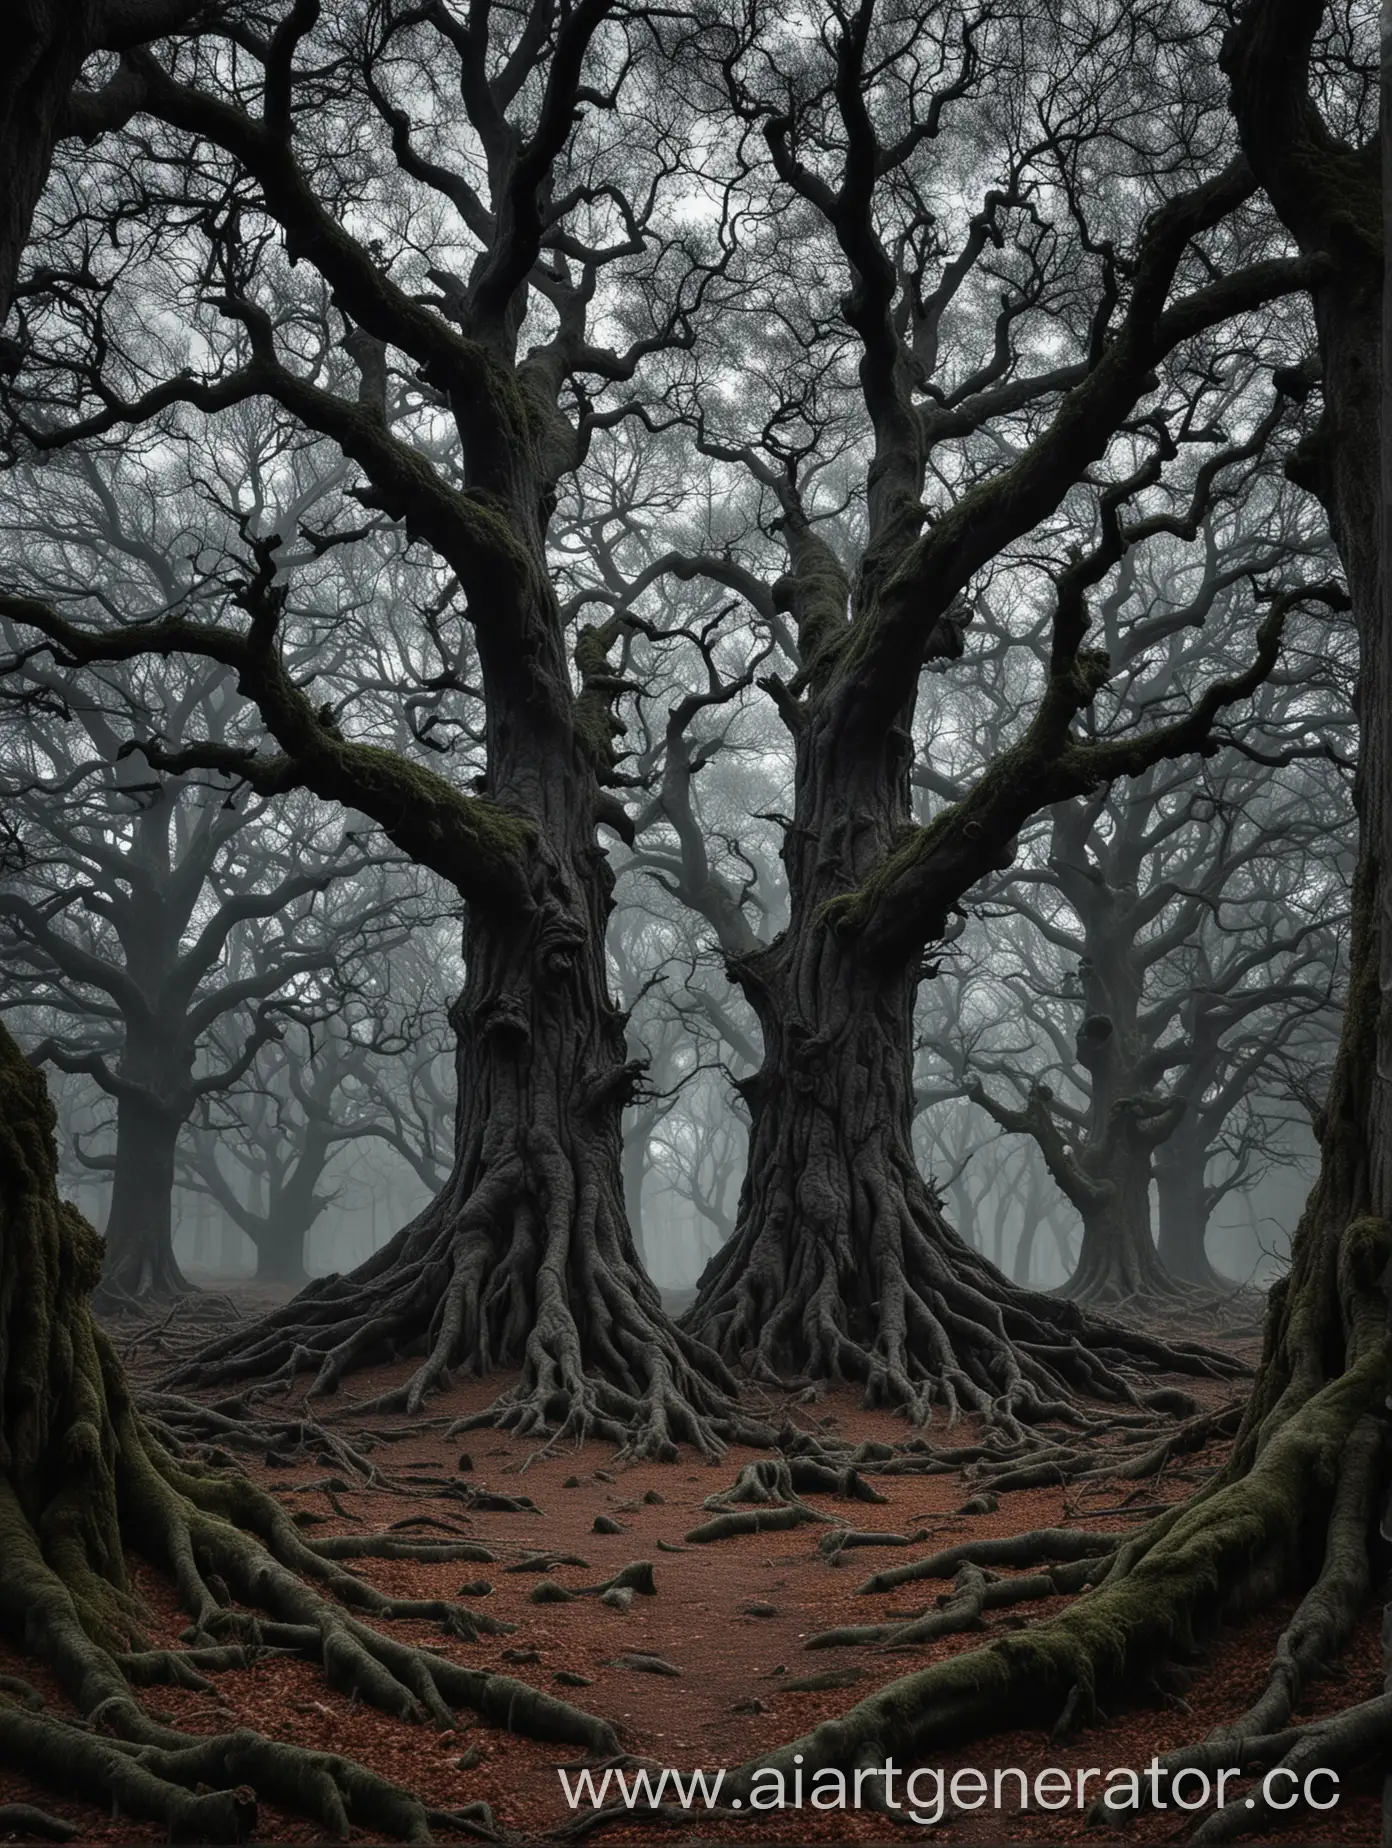 Dark Fantasy,a dark forest with large oaks that have elongated protrusions of 50 centimeters, a view directly onto one of the oaks from the 1st person